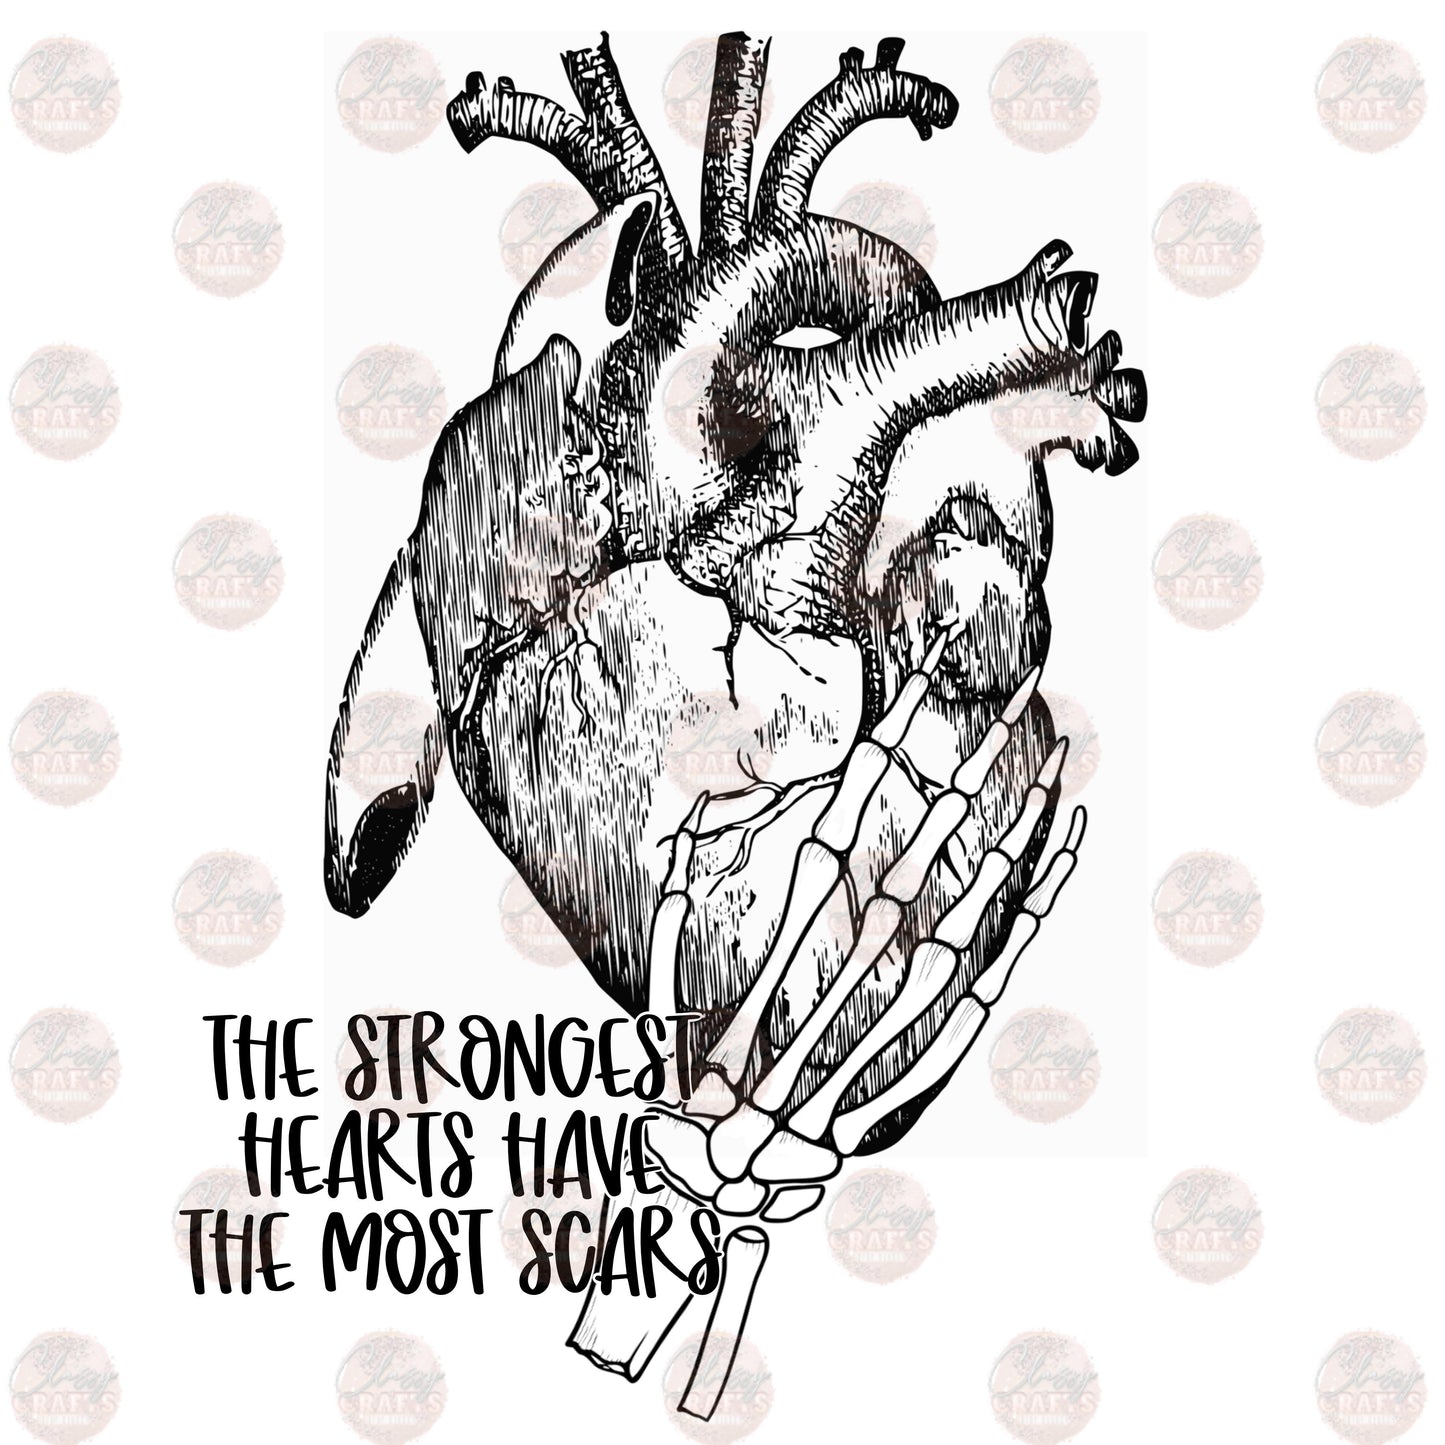 The Strongest Hearts Have the Most Scars - Sublimation Transfer